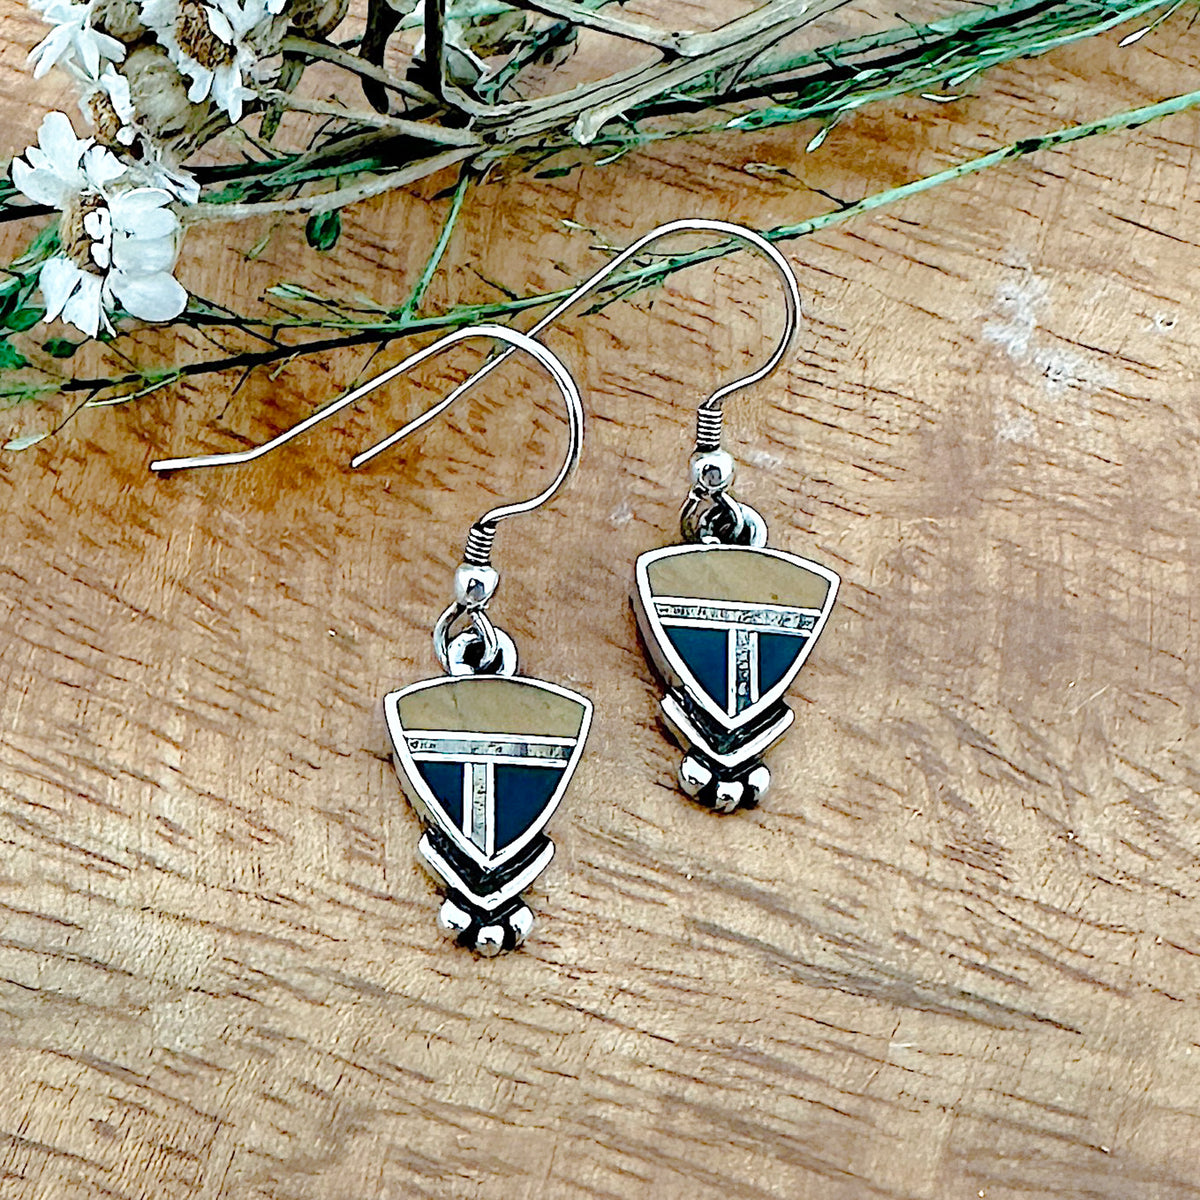 Navajo inlay earrings inlaid with Black Jade, Tiger's Eye and Black Jade. David Rosales Collection/ Super Smith